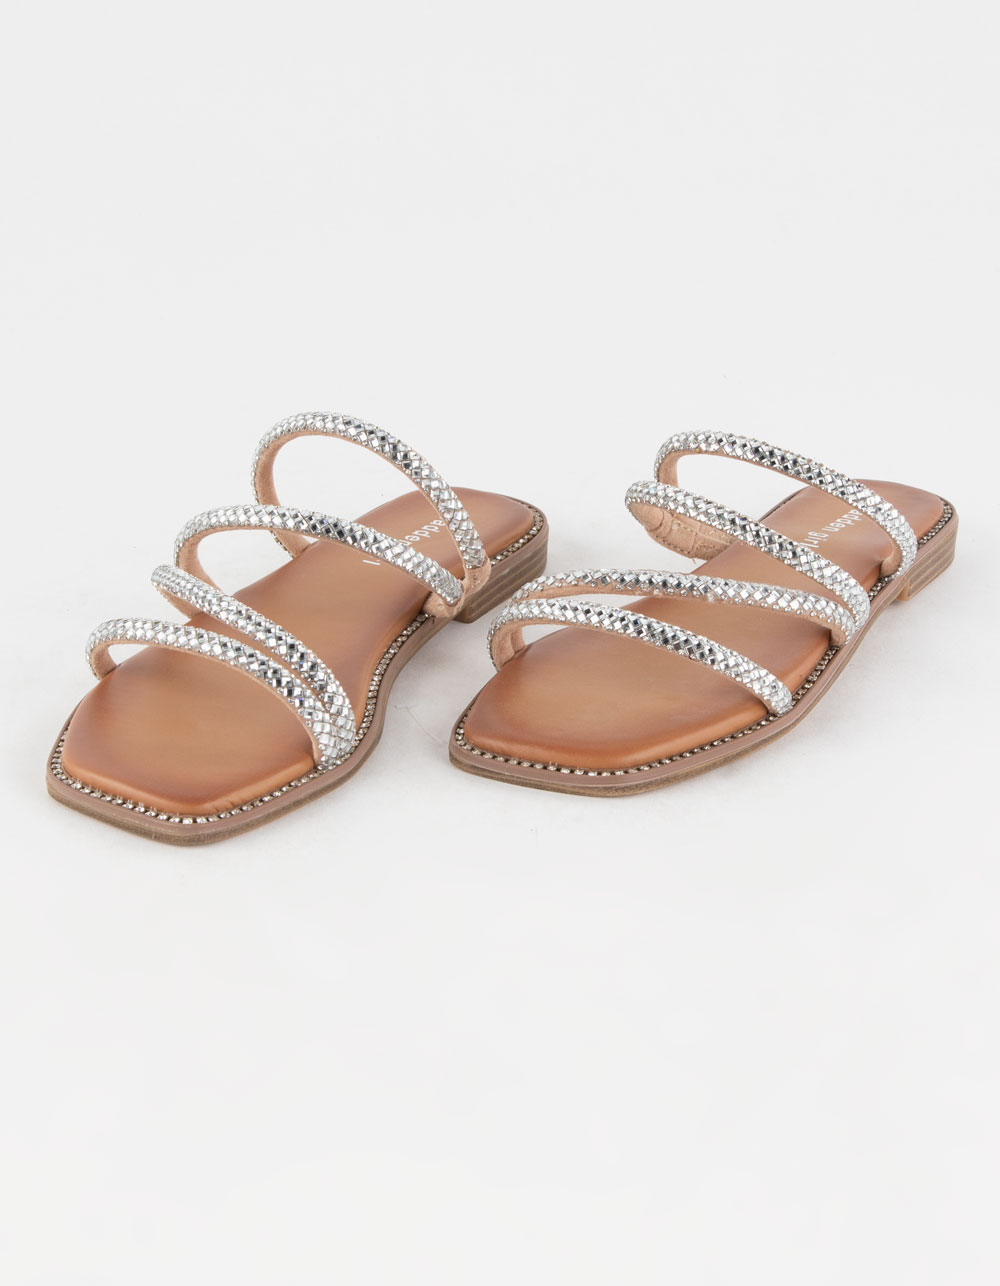 MADDEN GIRL Posh Womens Strappy Flat Sandals - METALLIC CMBO | Tillys